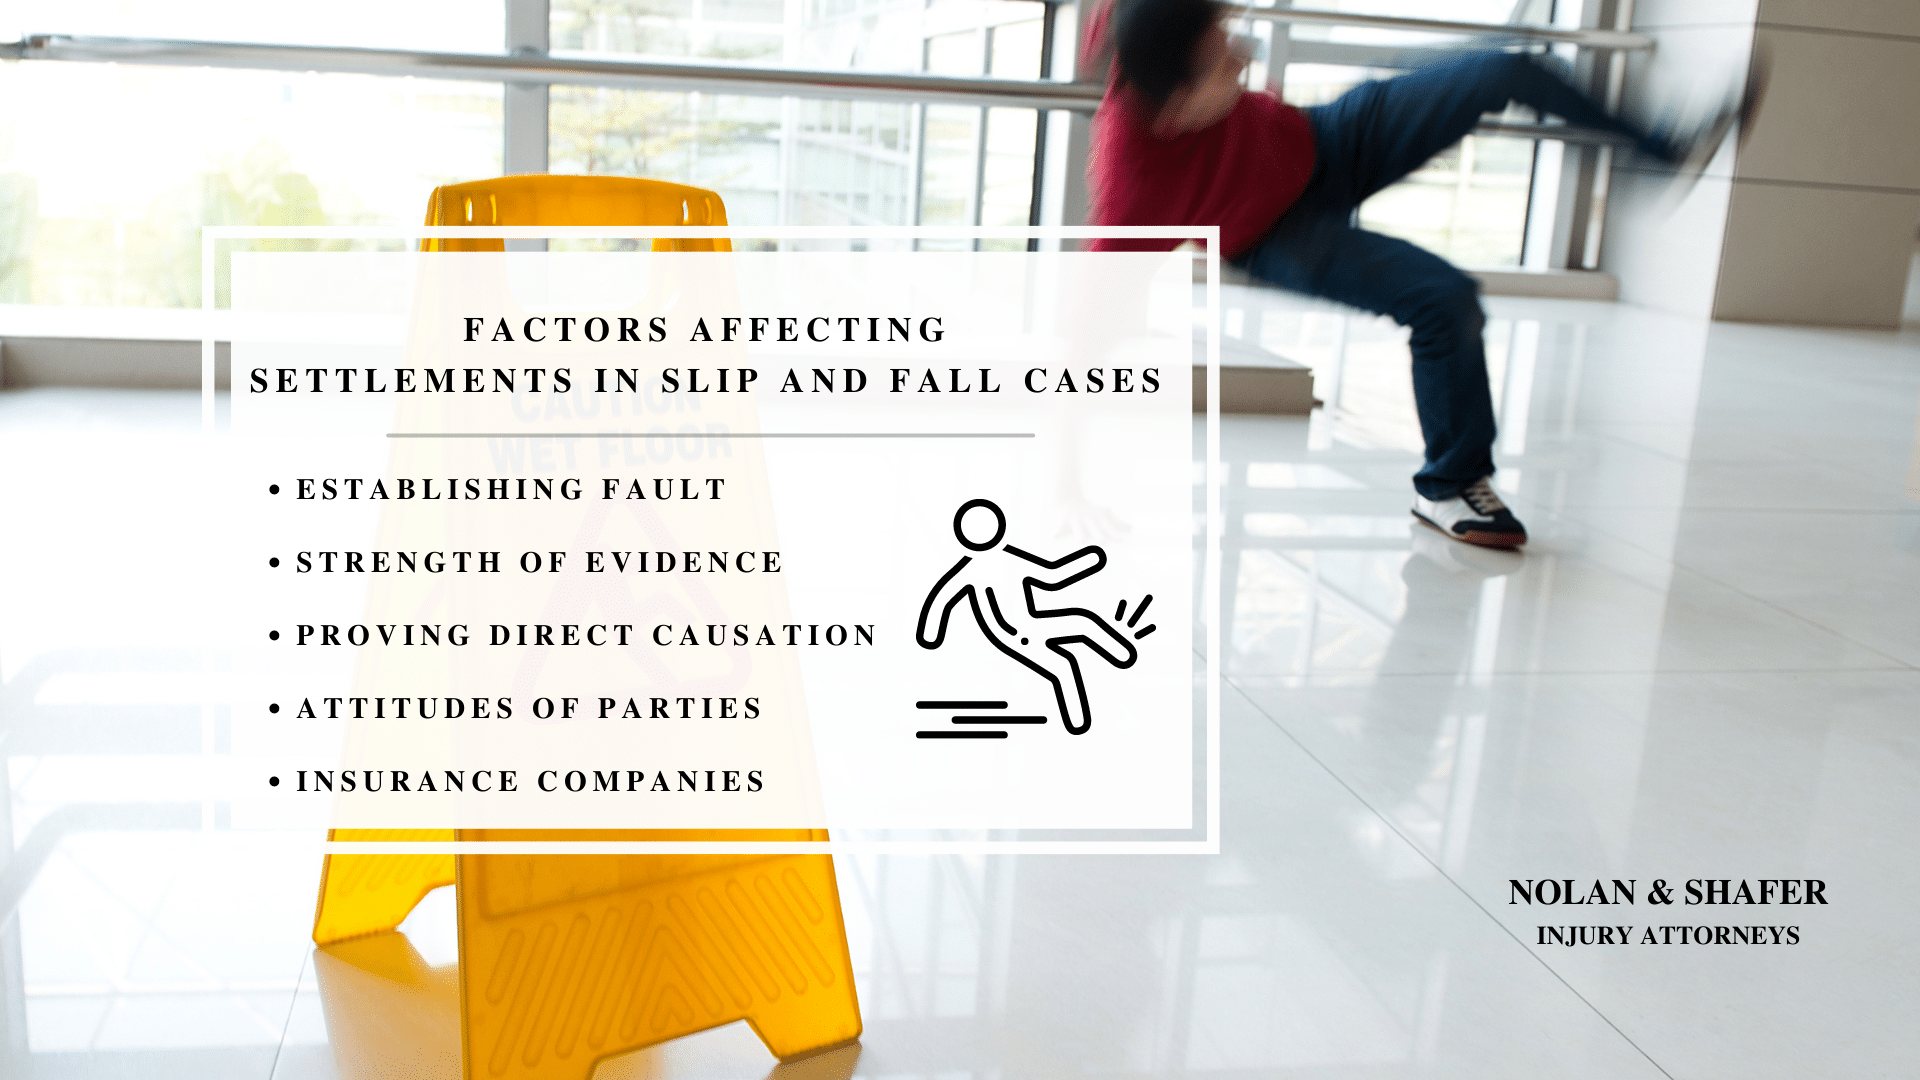 Infographic image of factors affecting settlements in slip and fall cases